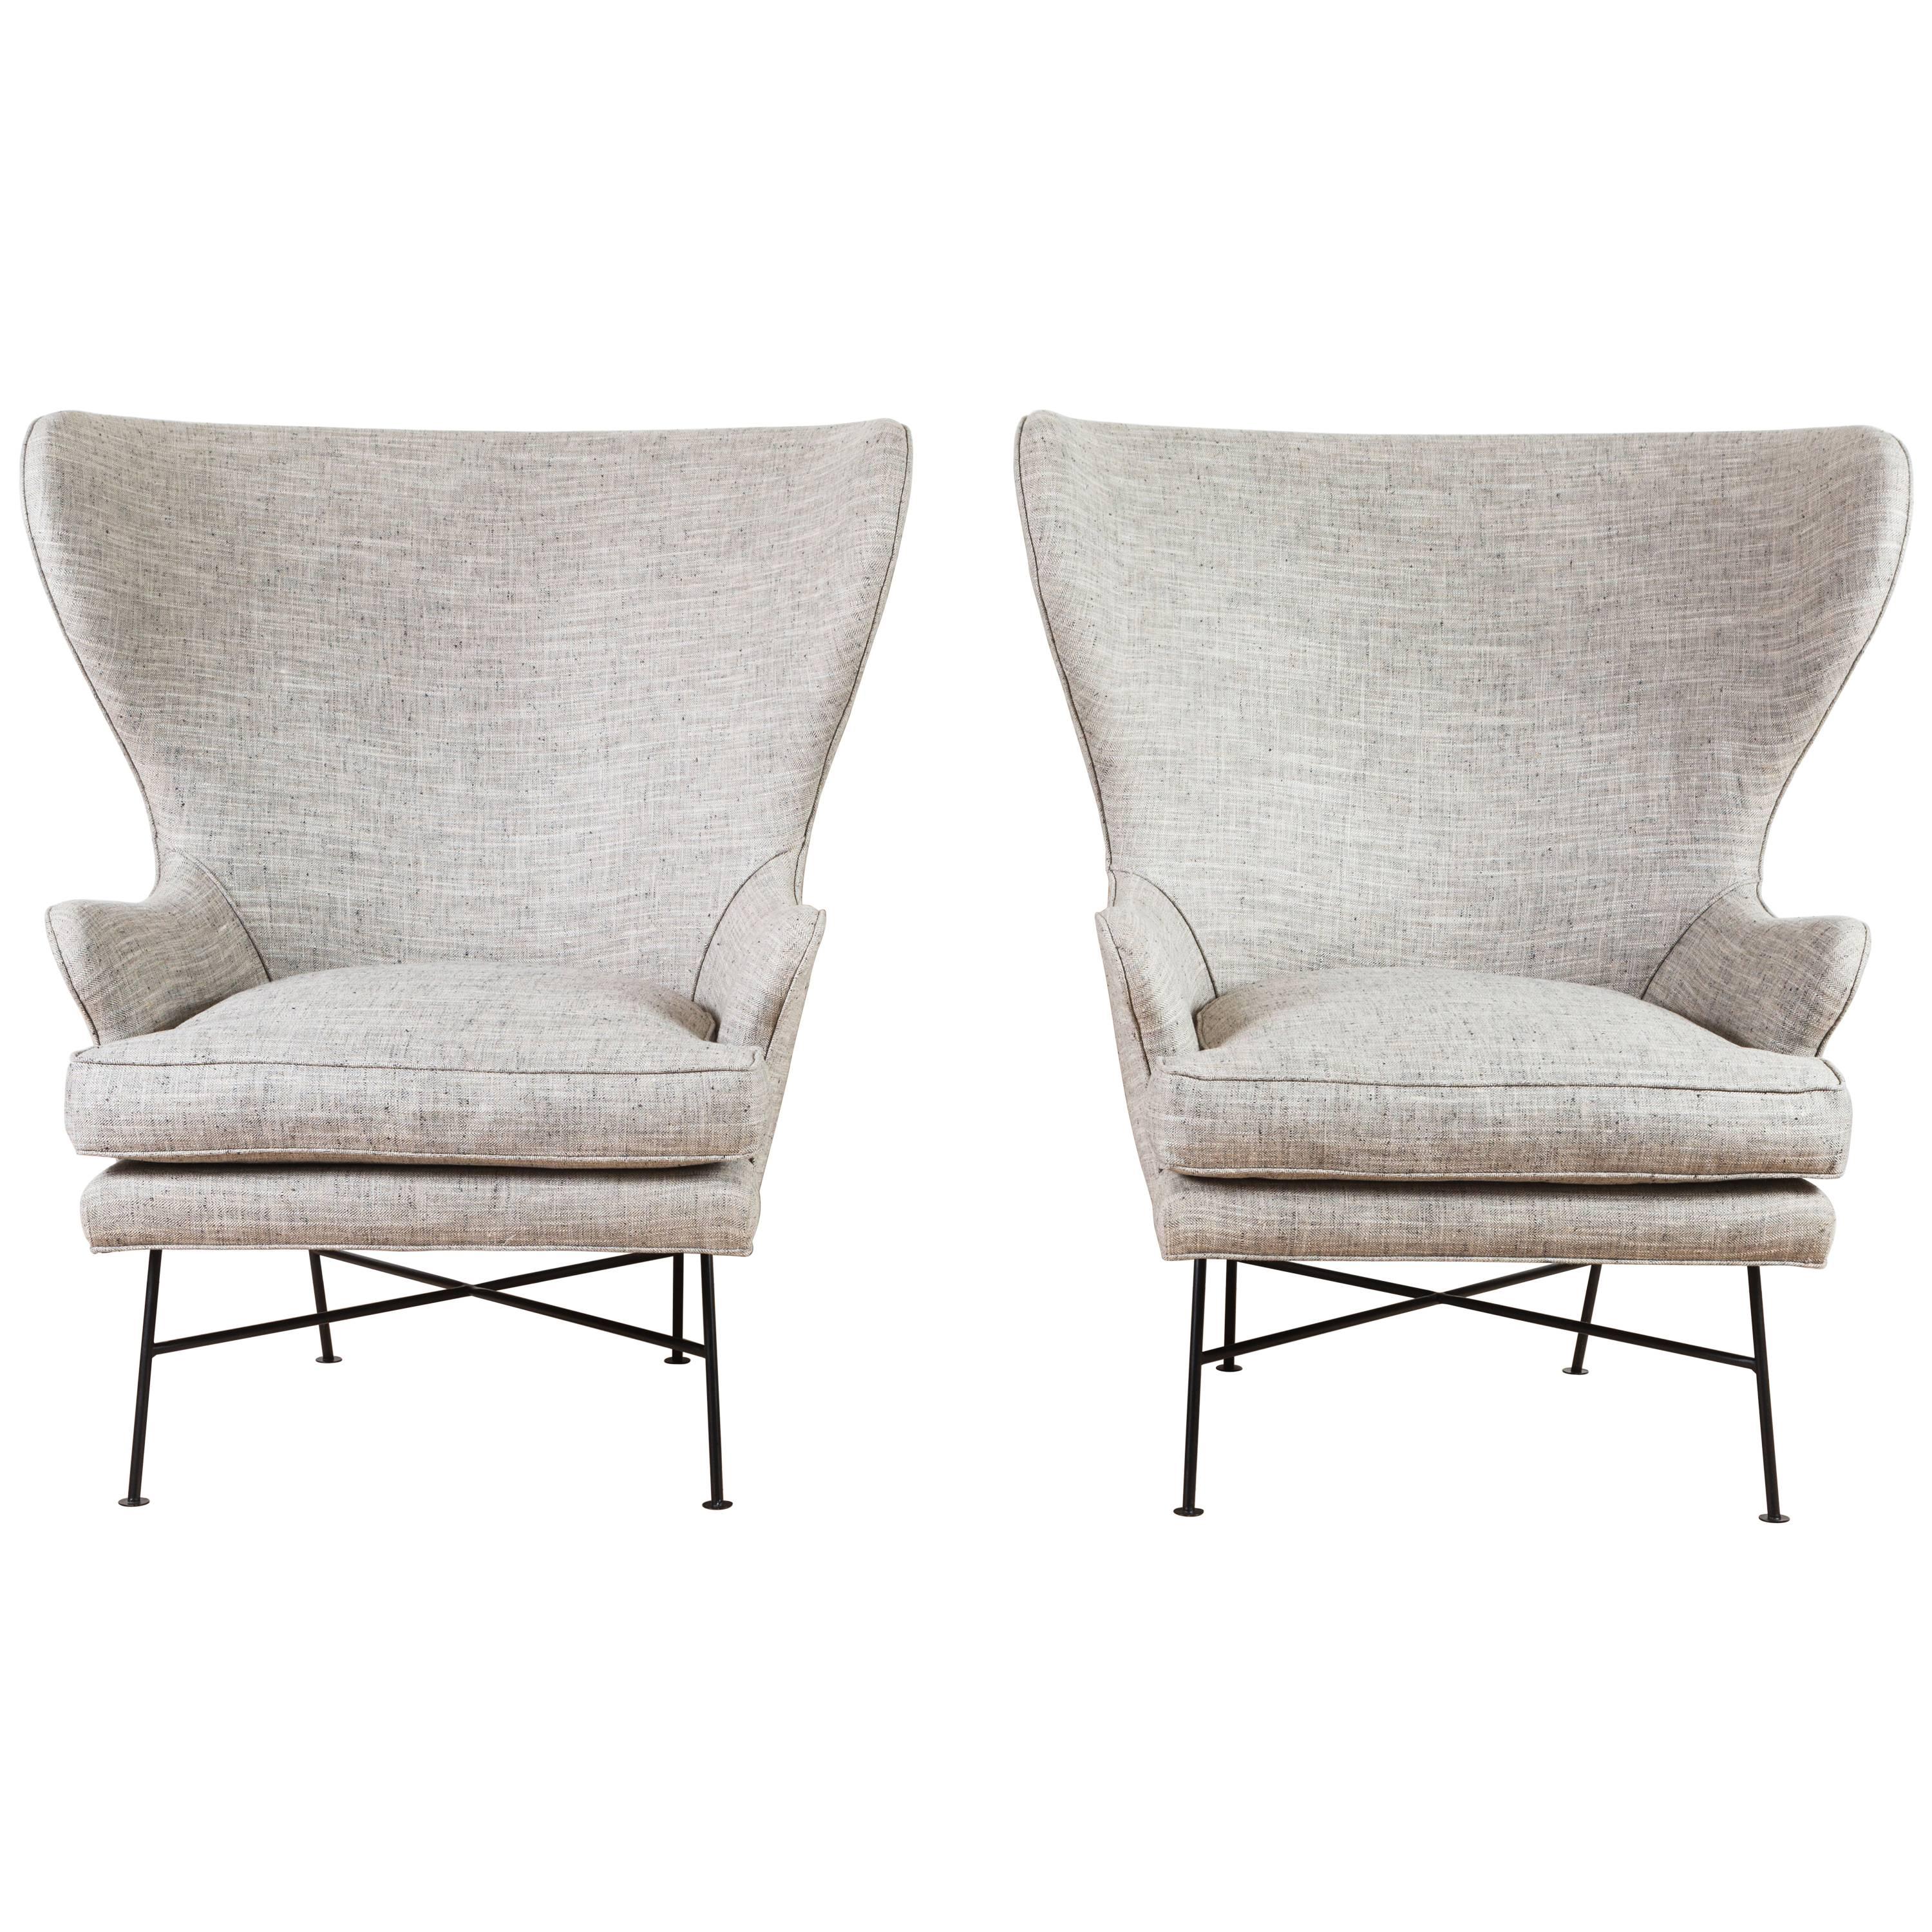 Pair of Modern Highland Wingback Chairs by Lawson-Fenning